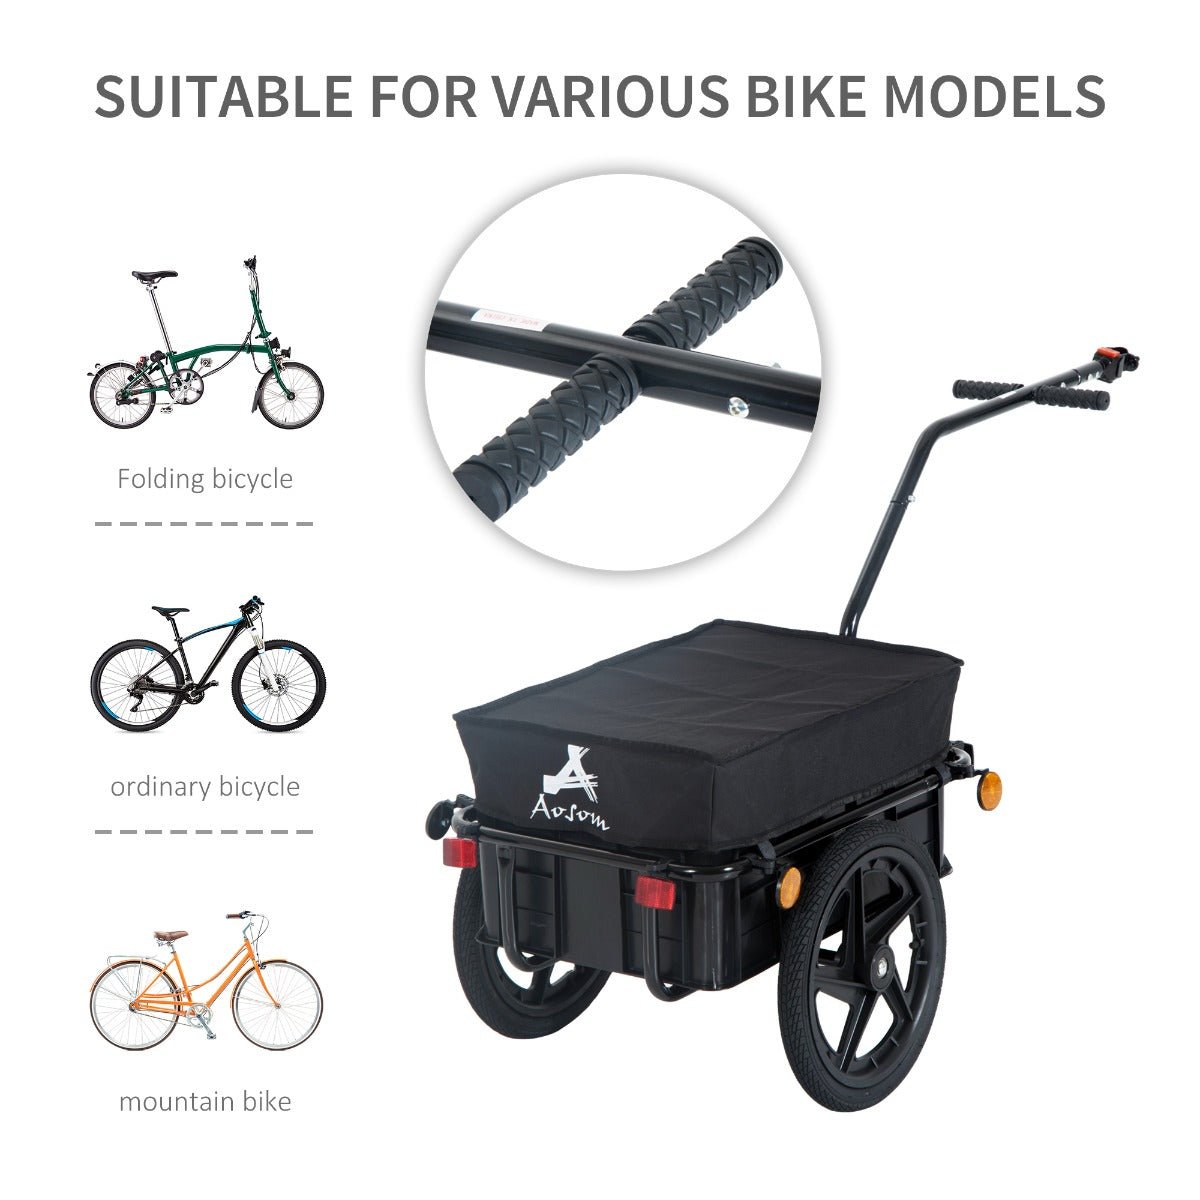 -Aosom Multi-Functional Double Wheel Internal Frame Enclosed Bicycle Cargo Trailer Steel Large Bike Luggage Cart Carrier Black - Outdoor Style Company